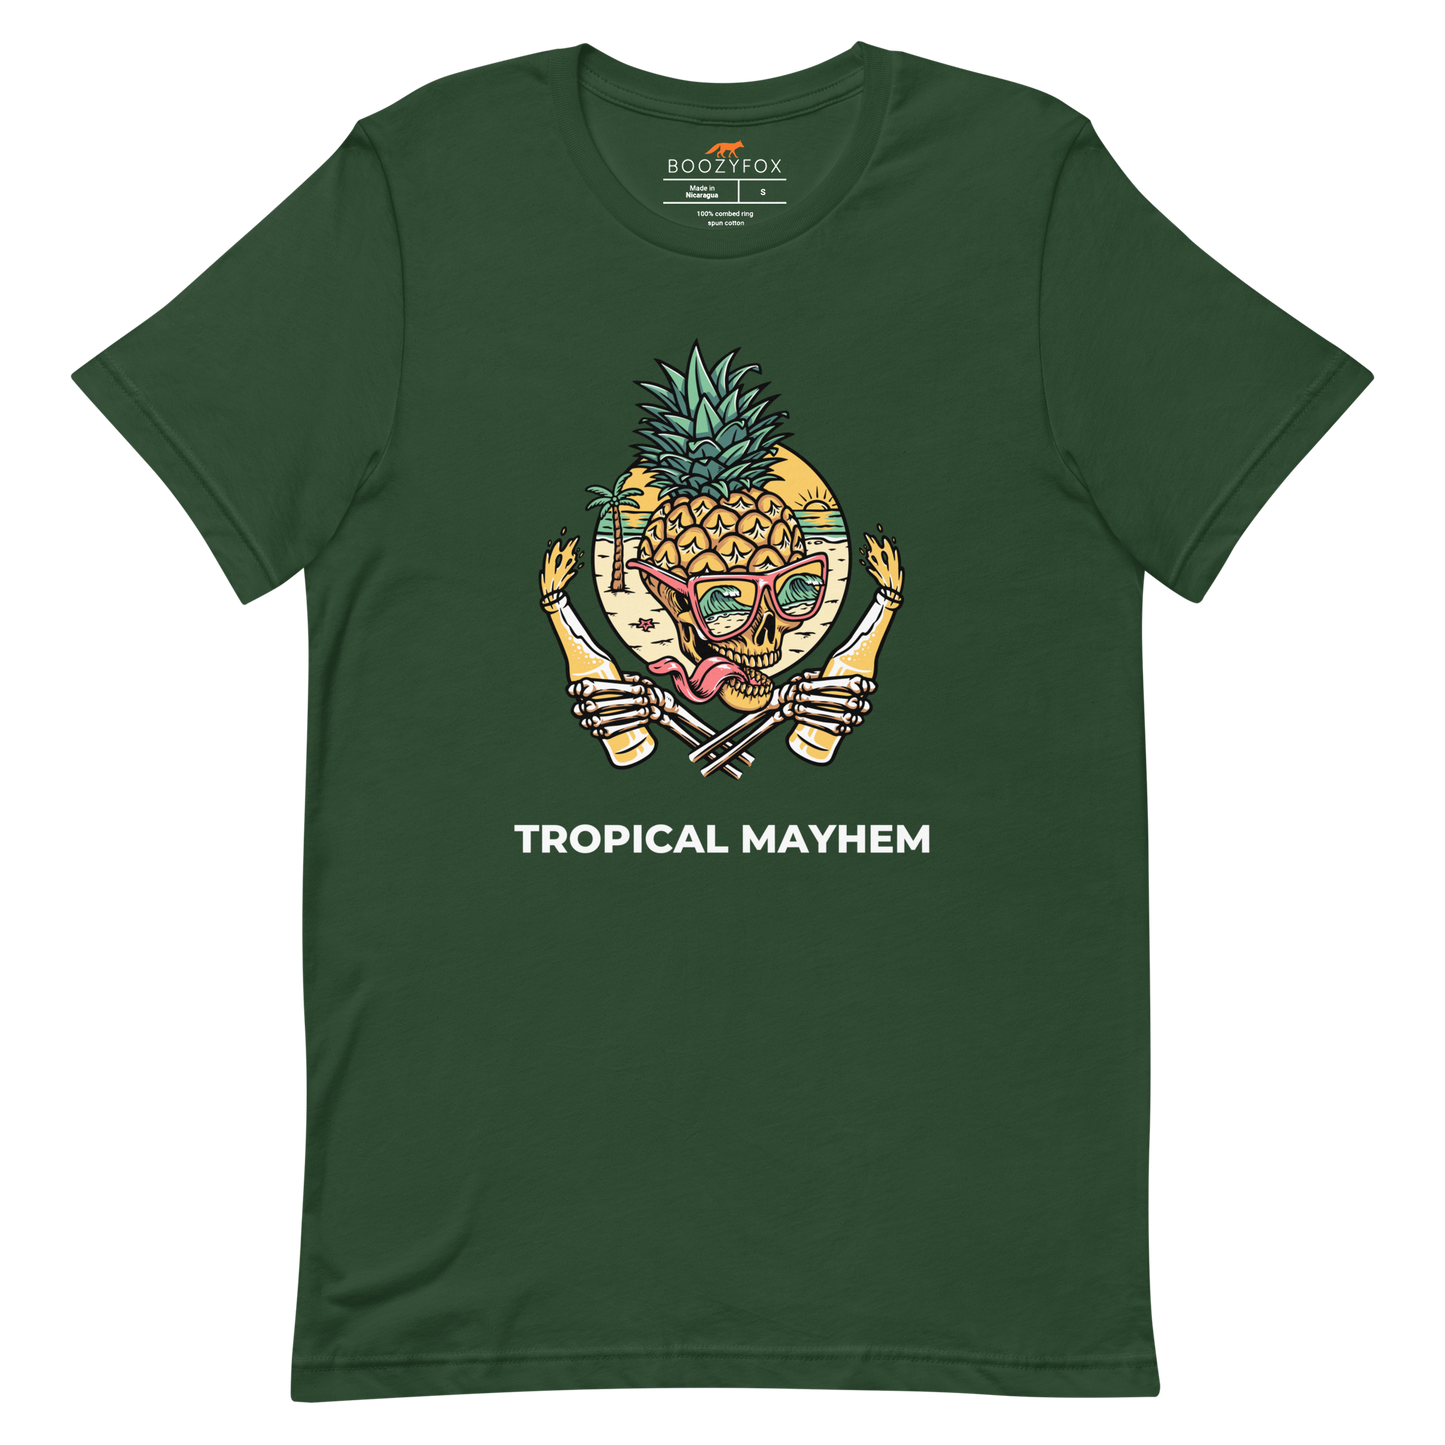 Forest Green Premium Tropical Mayhem Tee featuring a Crazy Pineapple Skull graphic on the chest - Funny Graphic Pineapple Tees - Boozy Fox